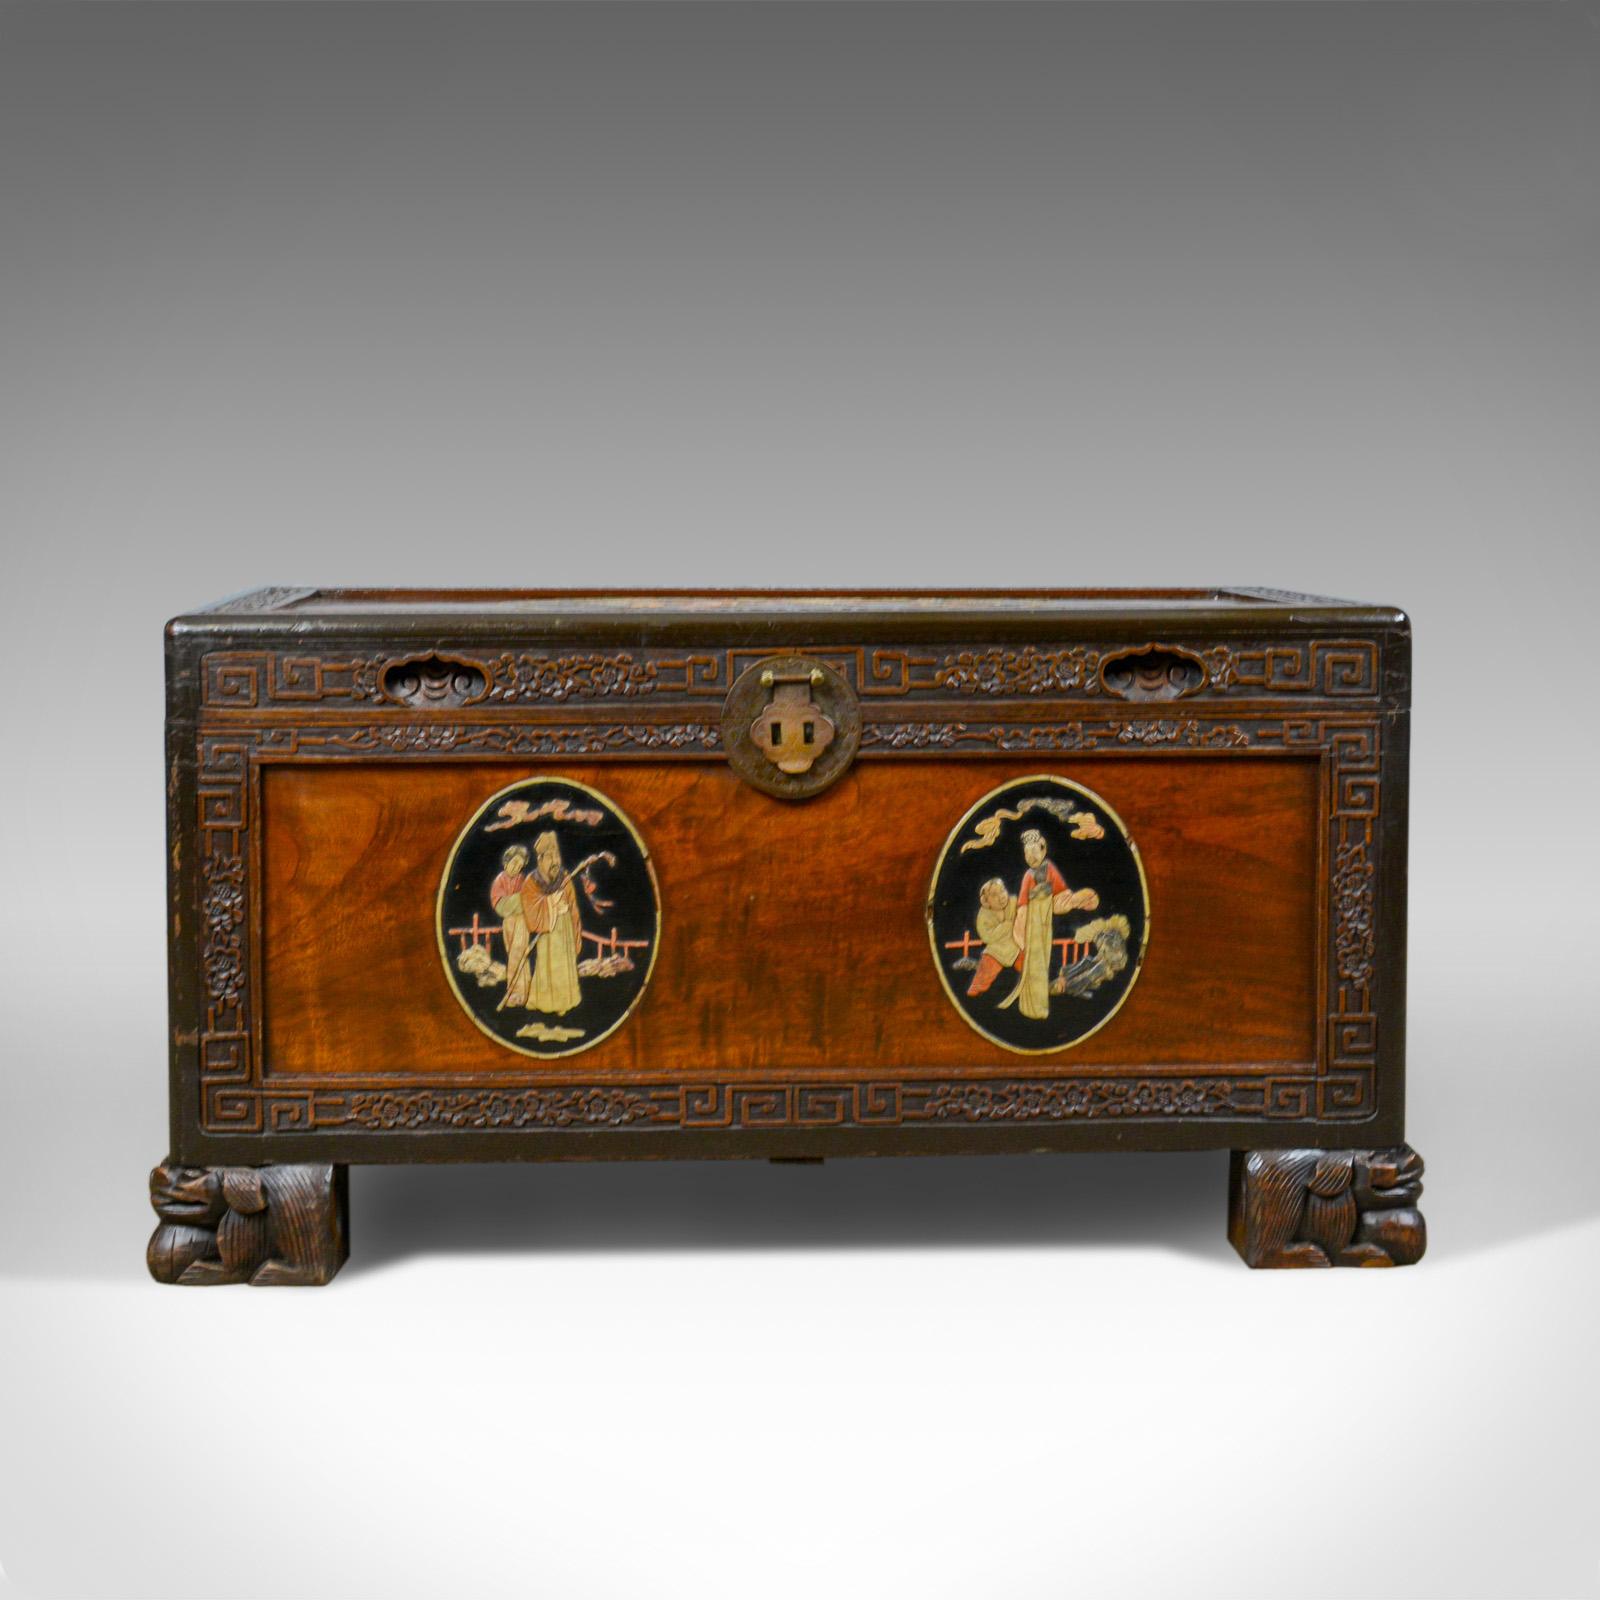 This is a Chinese camphor wood chest with oriental inlaid scenes. A trunk dating to the Art Deco period of the mid 20th century, circa 1940.

Fabulously decorated with inlaid panel scenes
Delineated with foliate carved perimeter bands 
Standing